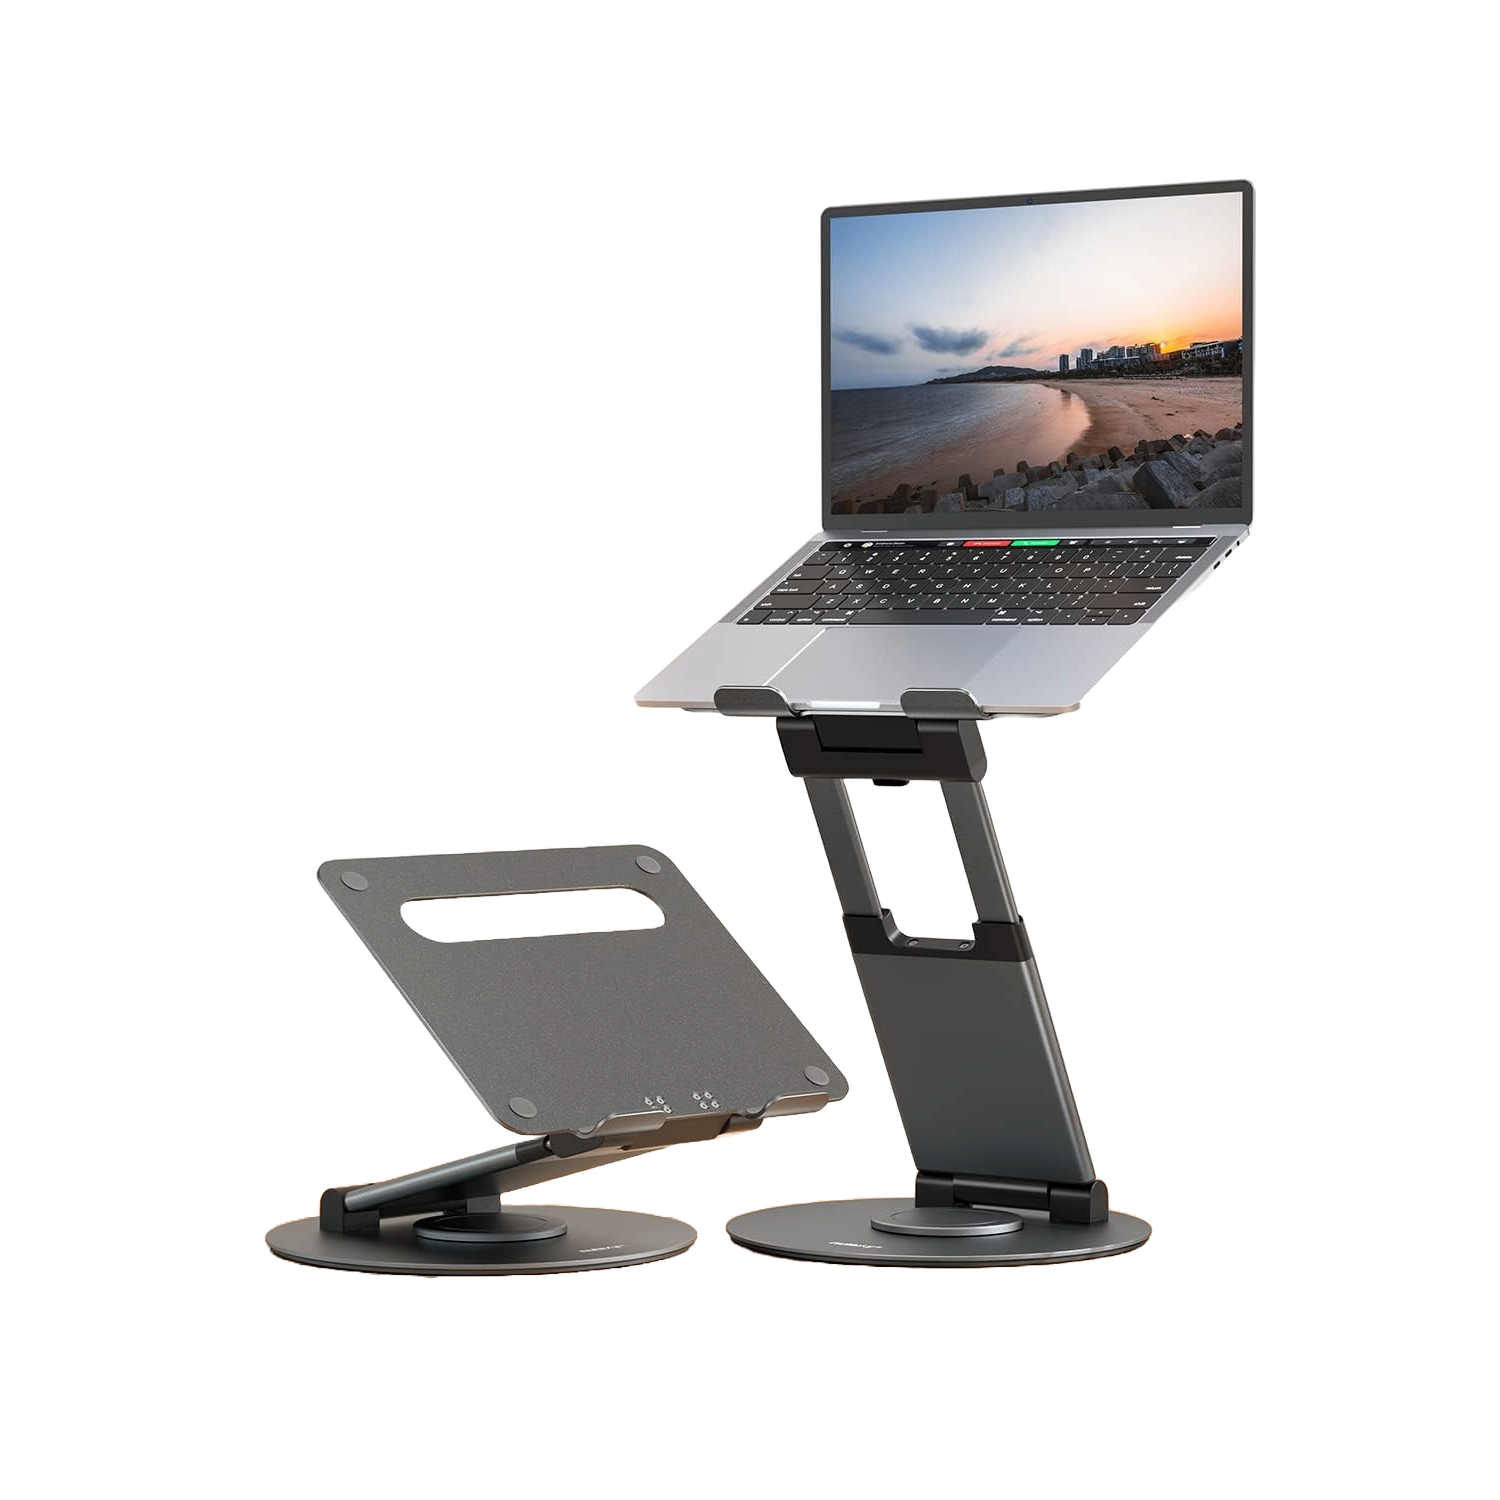 Two Nulaxy Telescopic 360 Rotating Laptop Stands side by side with one holding a MacBook.